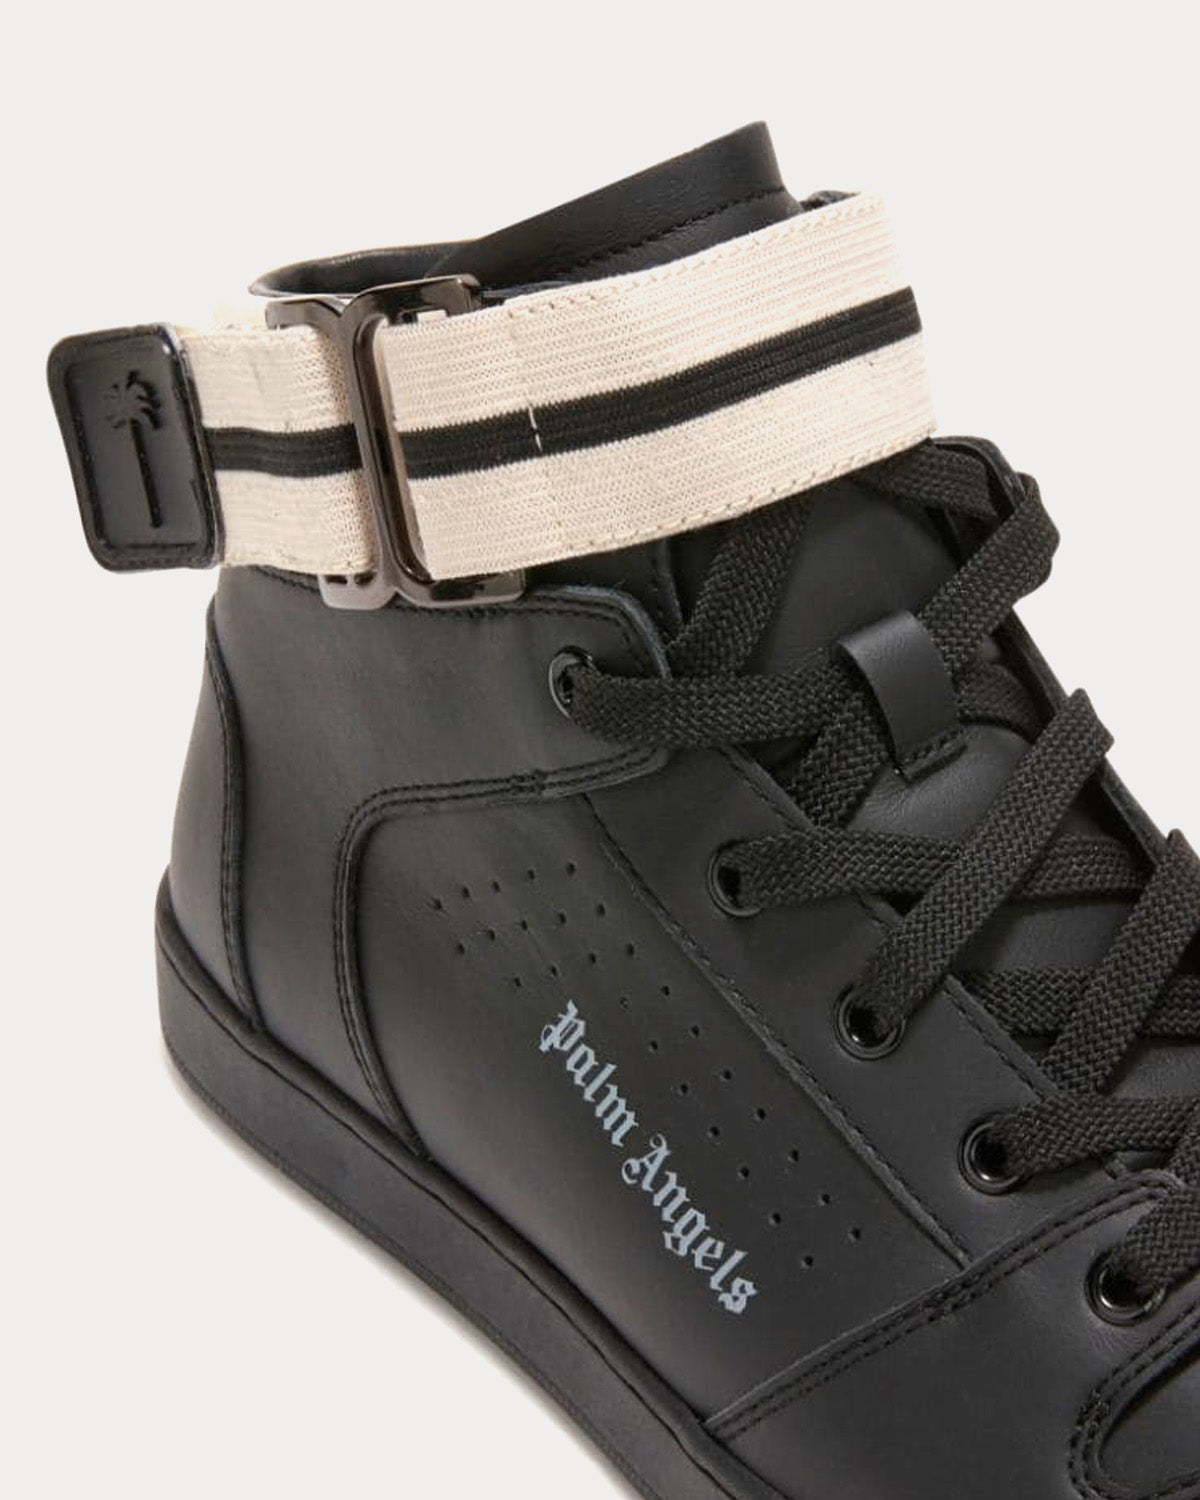 Palm Angels - Palm One Black High Top Sneakers